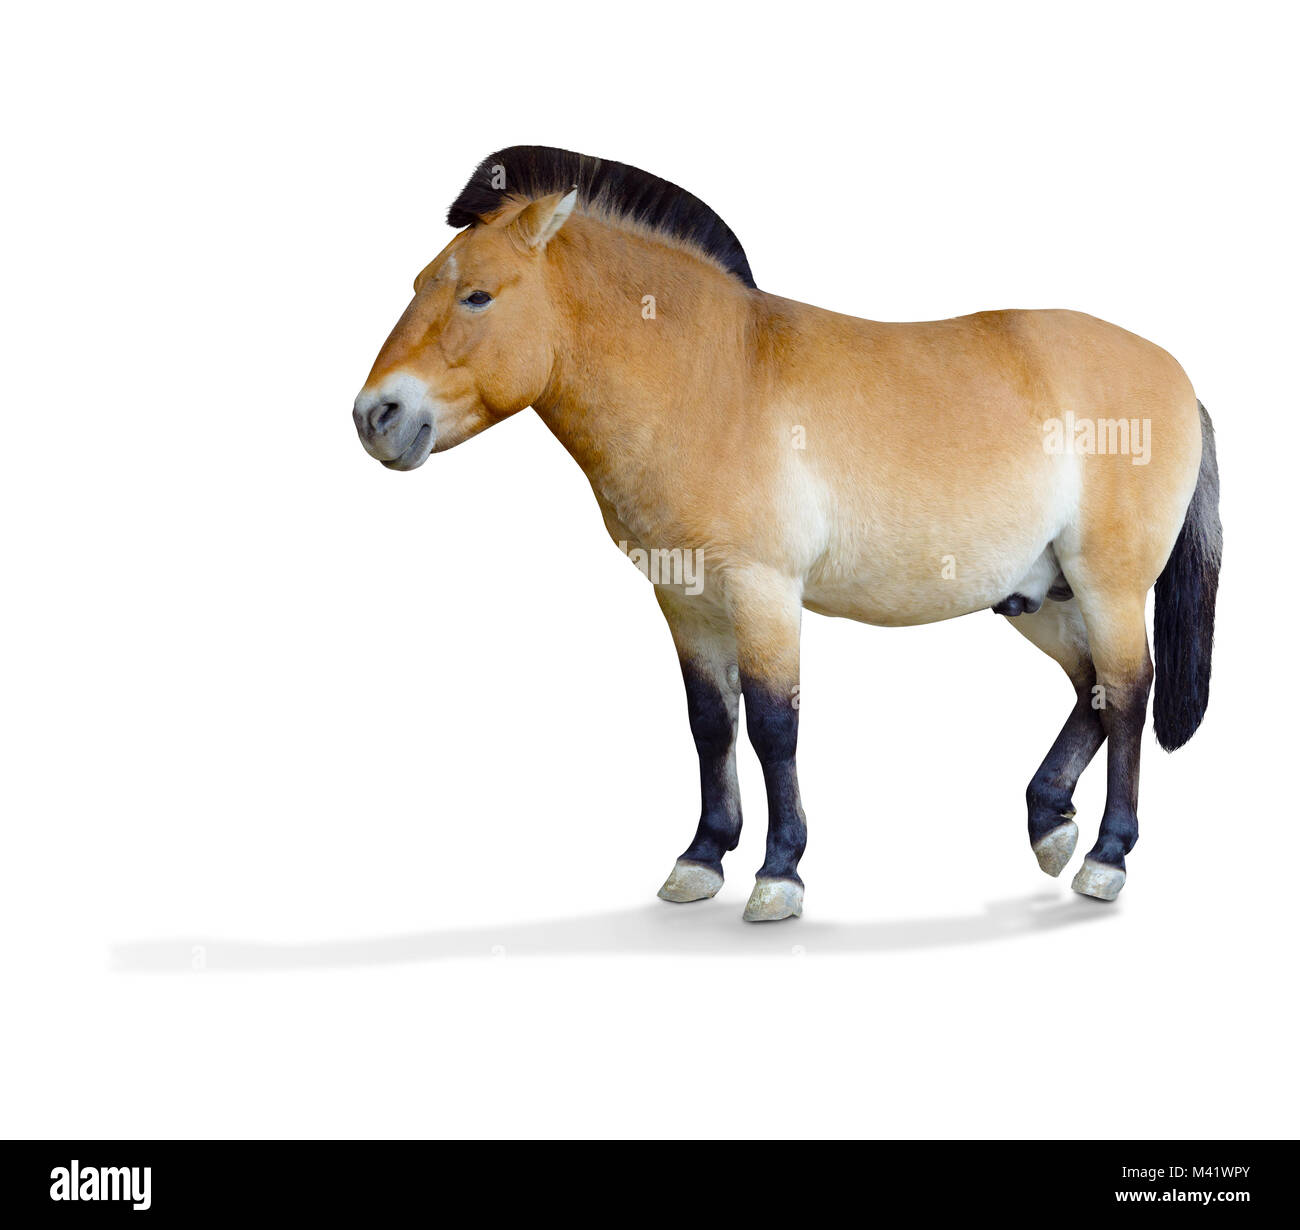 Przewalski's horse. Isolated over white background. the little horse scribbles Stock Photo